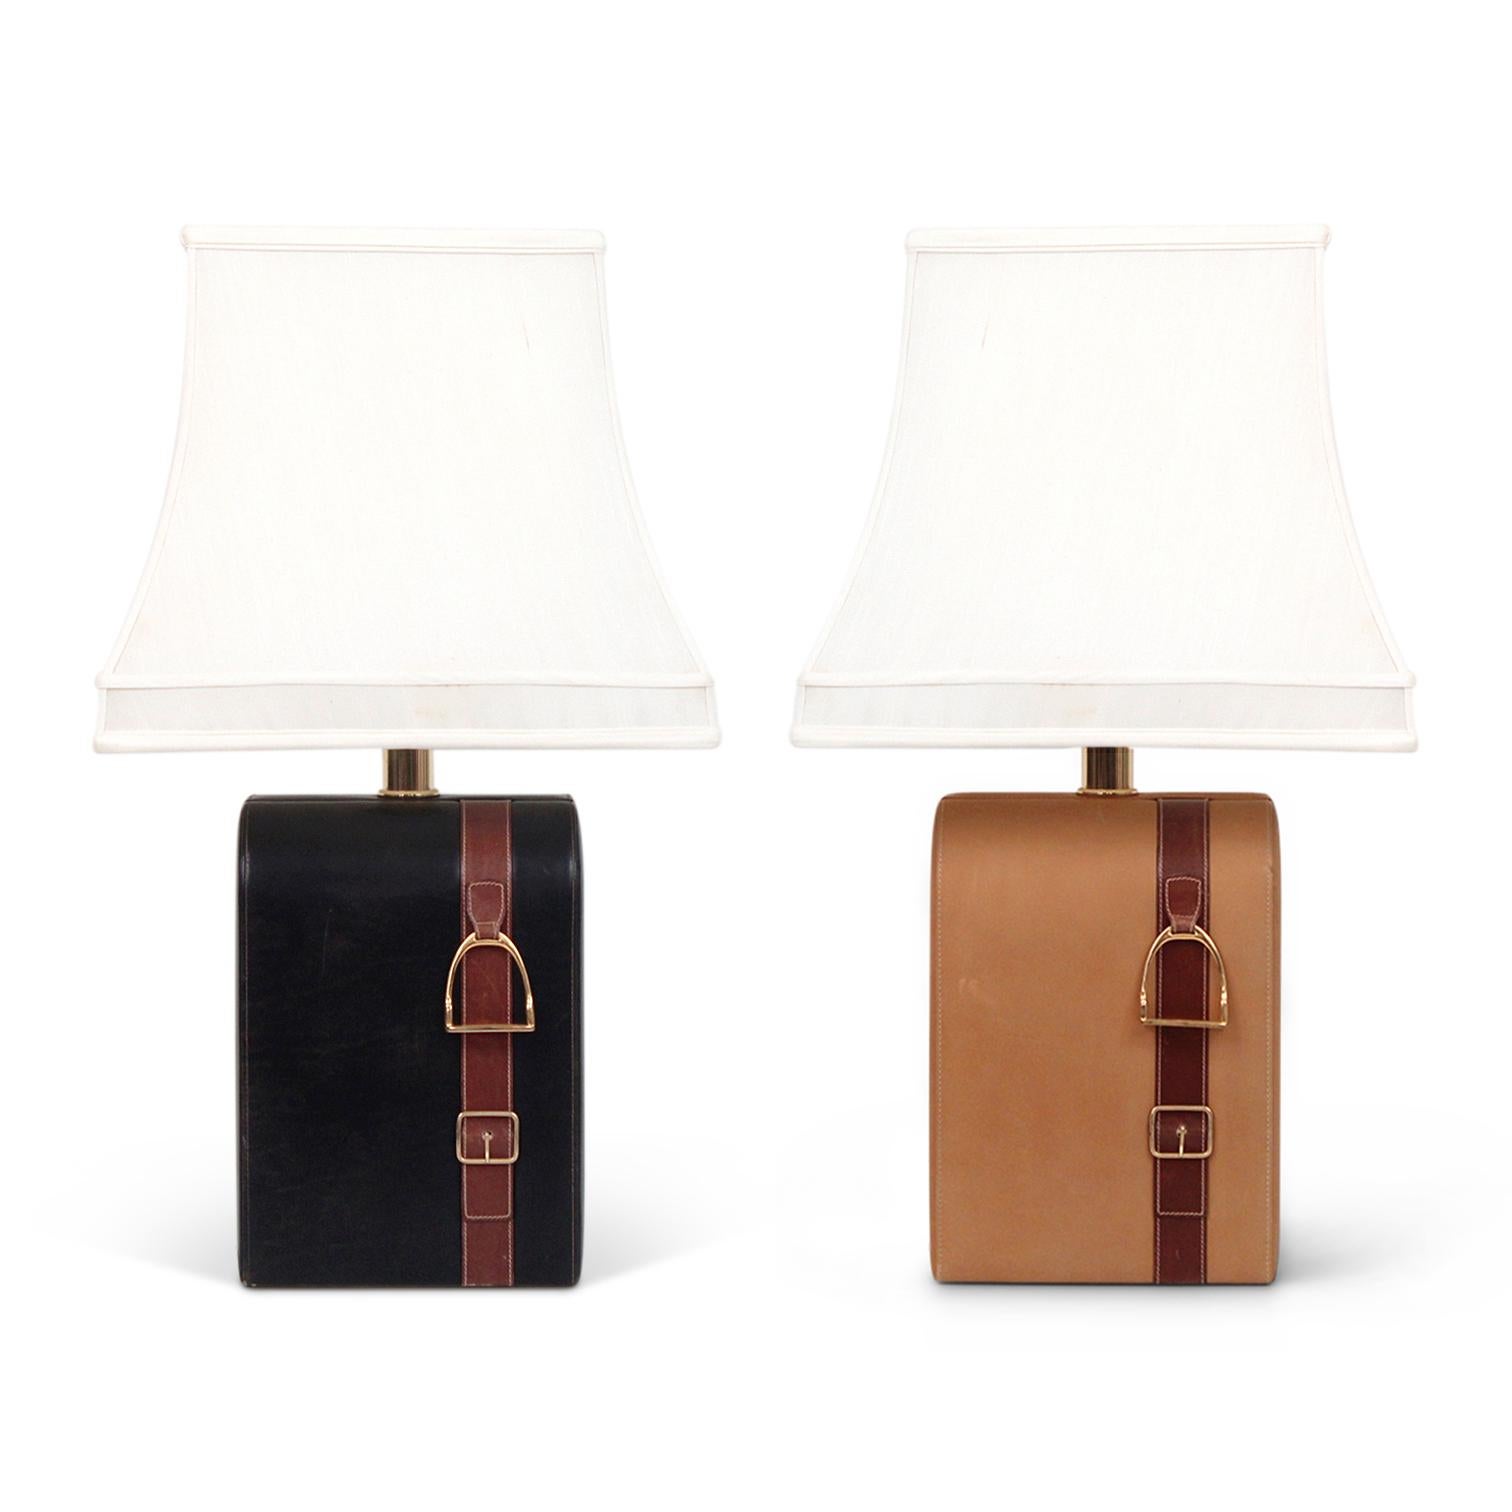 Pair of equestrian themed table lamps by Gucci. One in black and one in a natural saddle colored leather. Brass stirrups and stitched belting leather details. Made in Italy circa the 1970's.

 